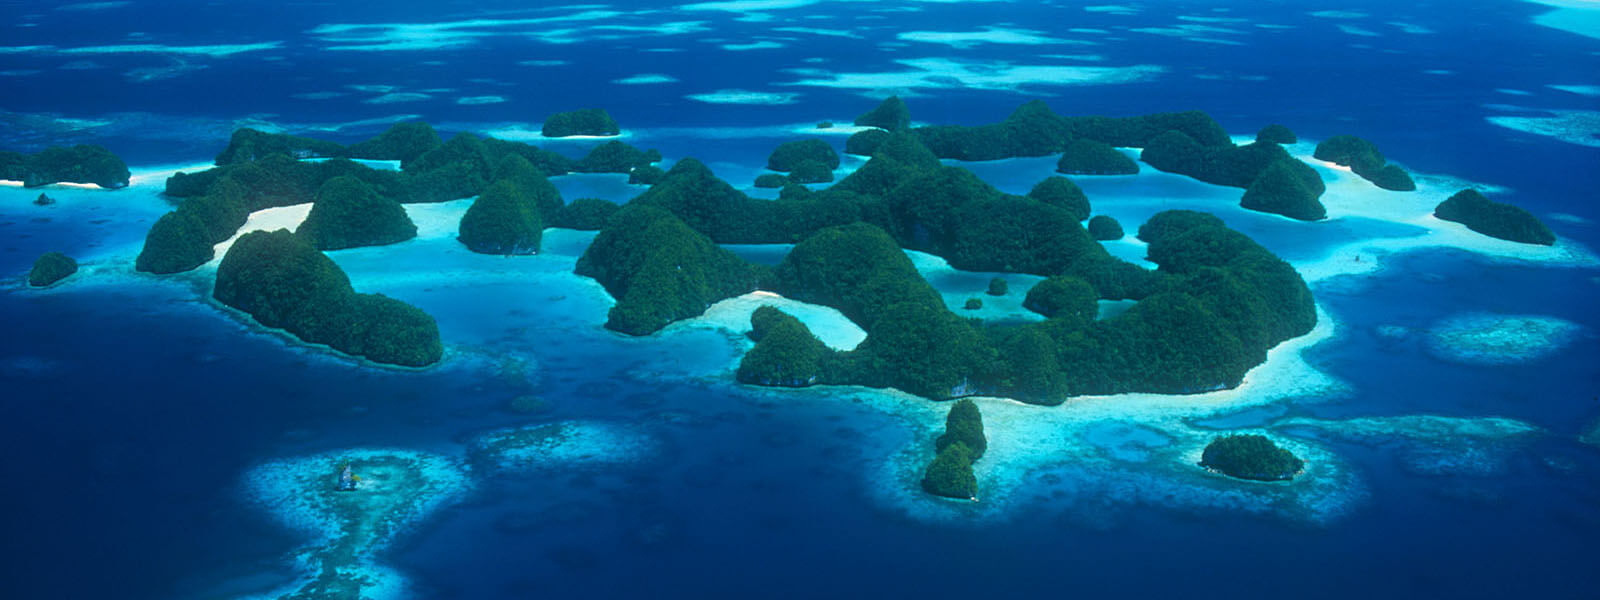 Aerial view of Palau's famous 70 islands